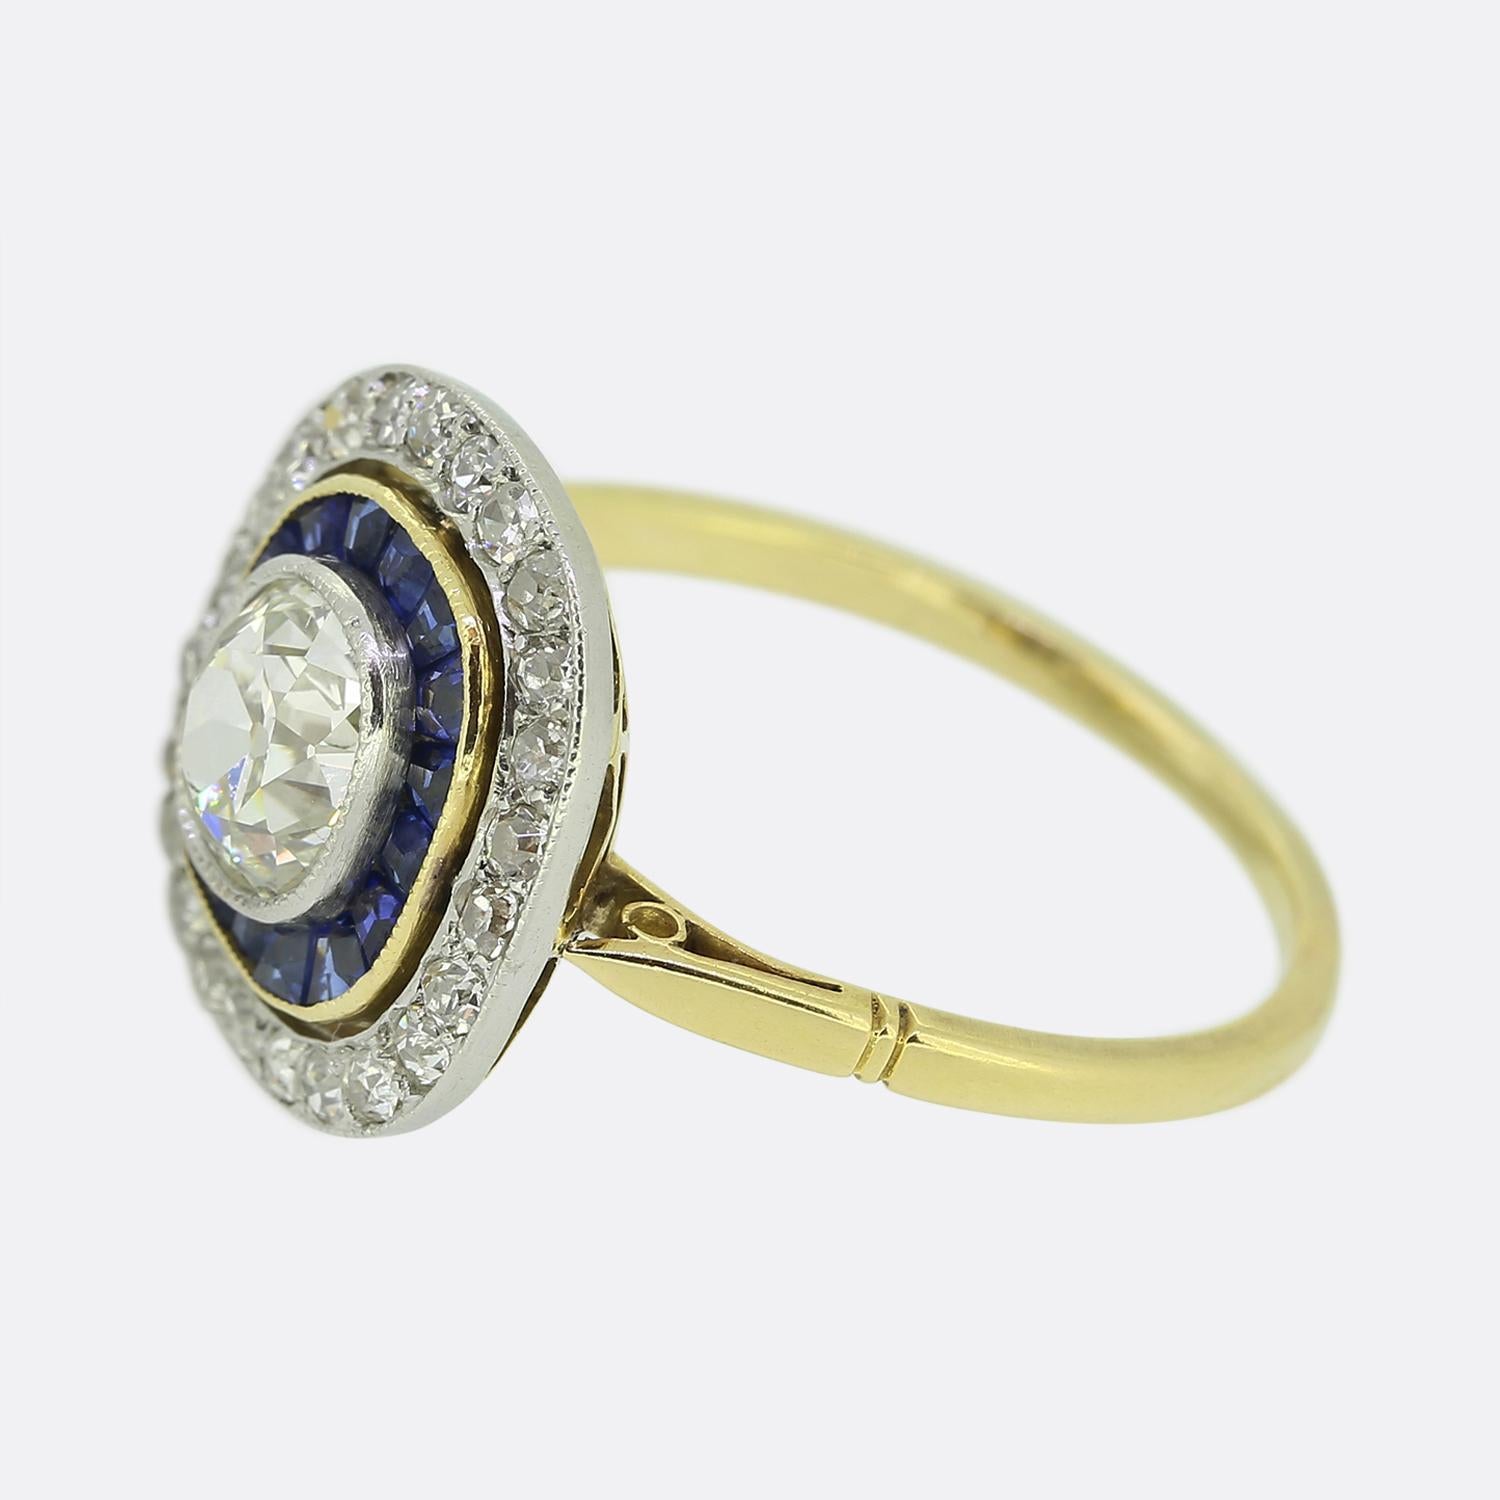 Here we have a stunning cluster ring taken from a time when the Art Deco style was continuing to revolutionise the world of design. A single old cushion cut diamond sits proud at the centre of the face in a fine platinum milgrain setting. This